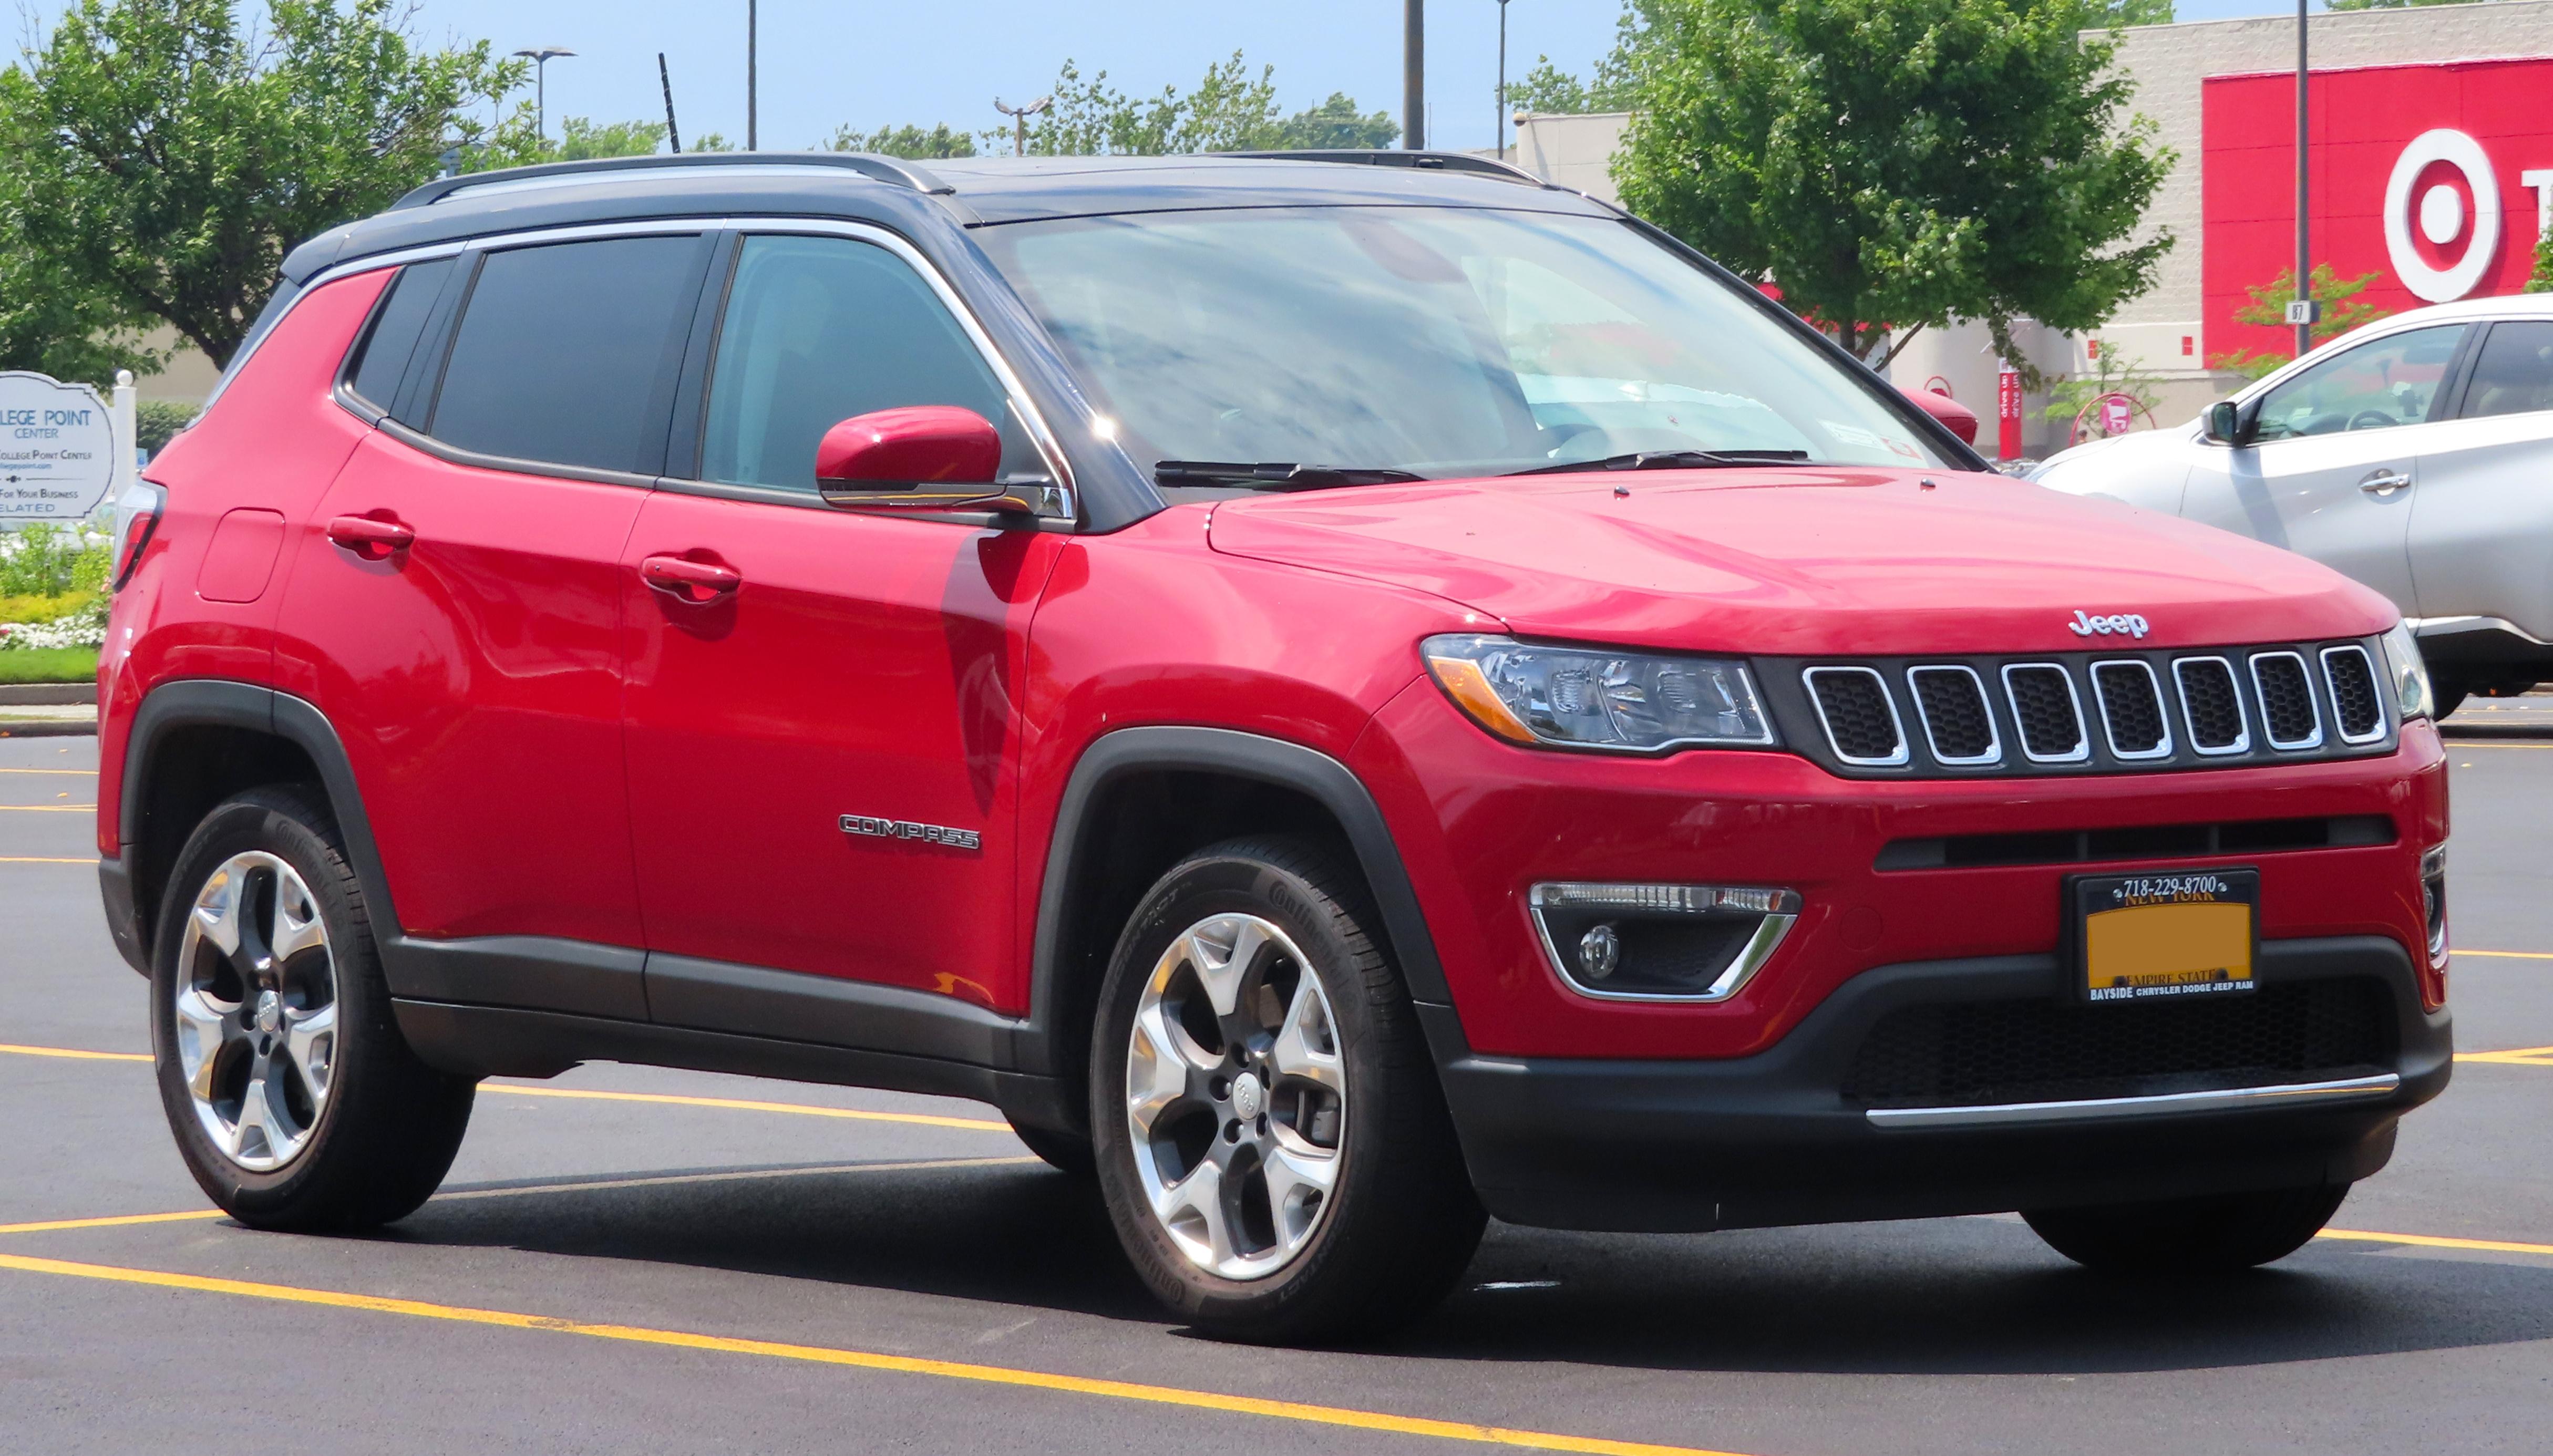 Factors to Consider When Choosing the Right Oil for Your Jeep Compass